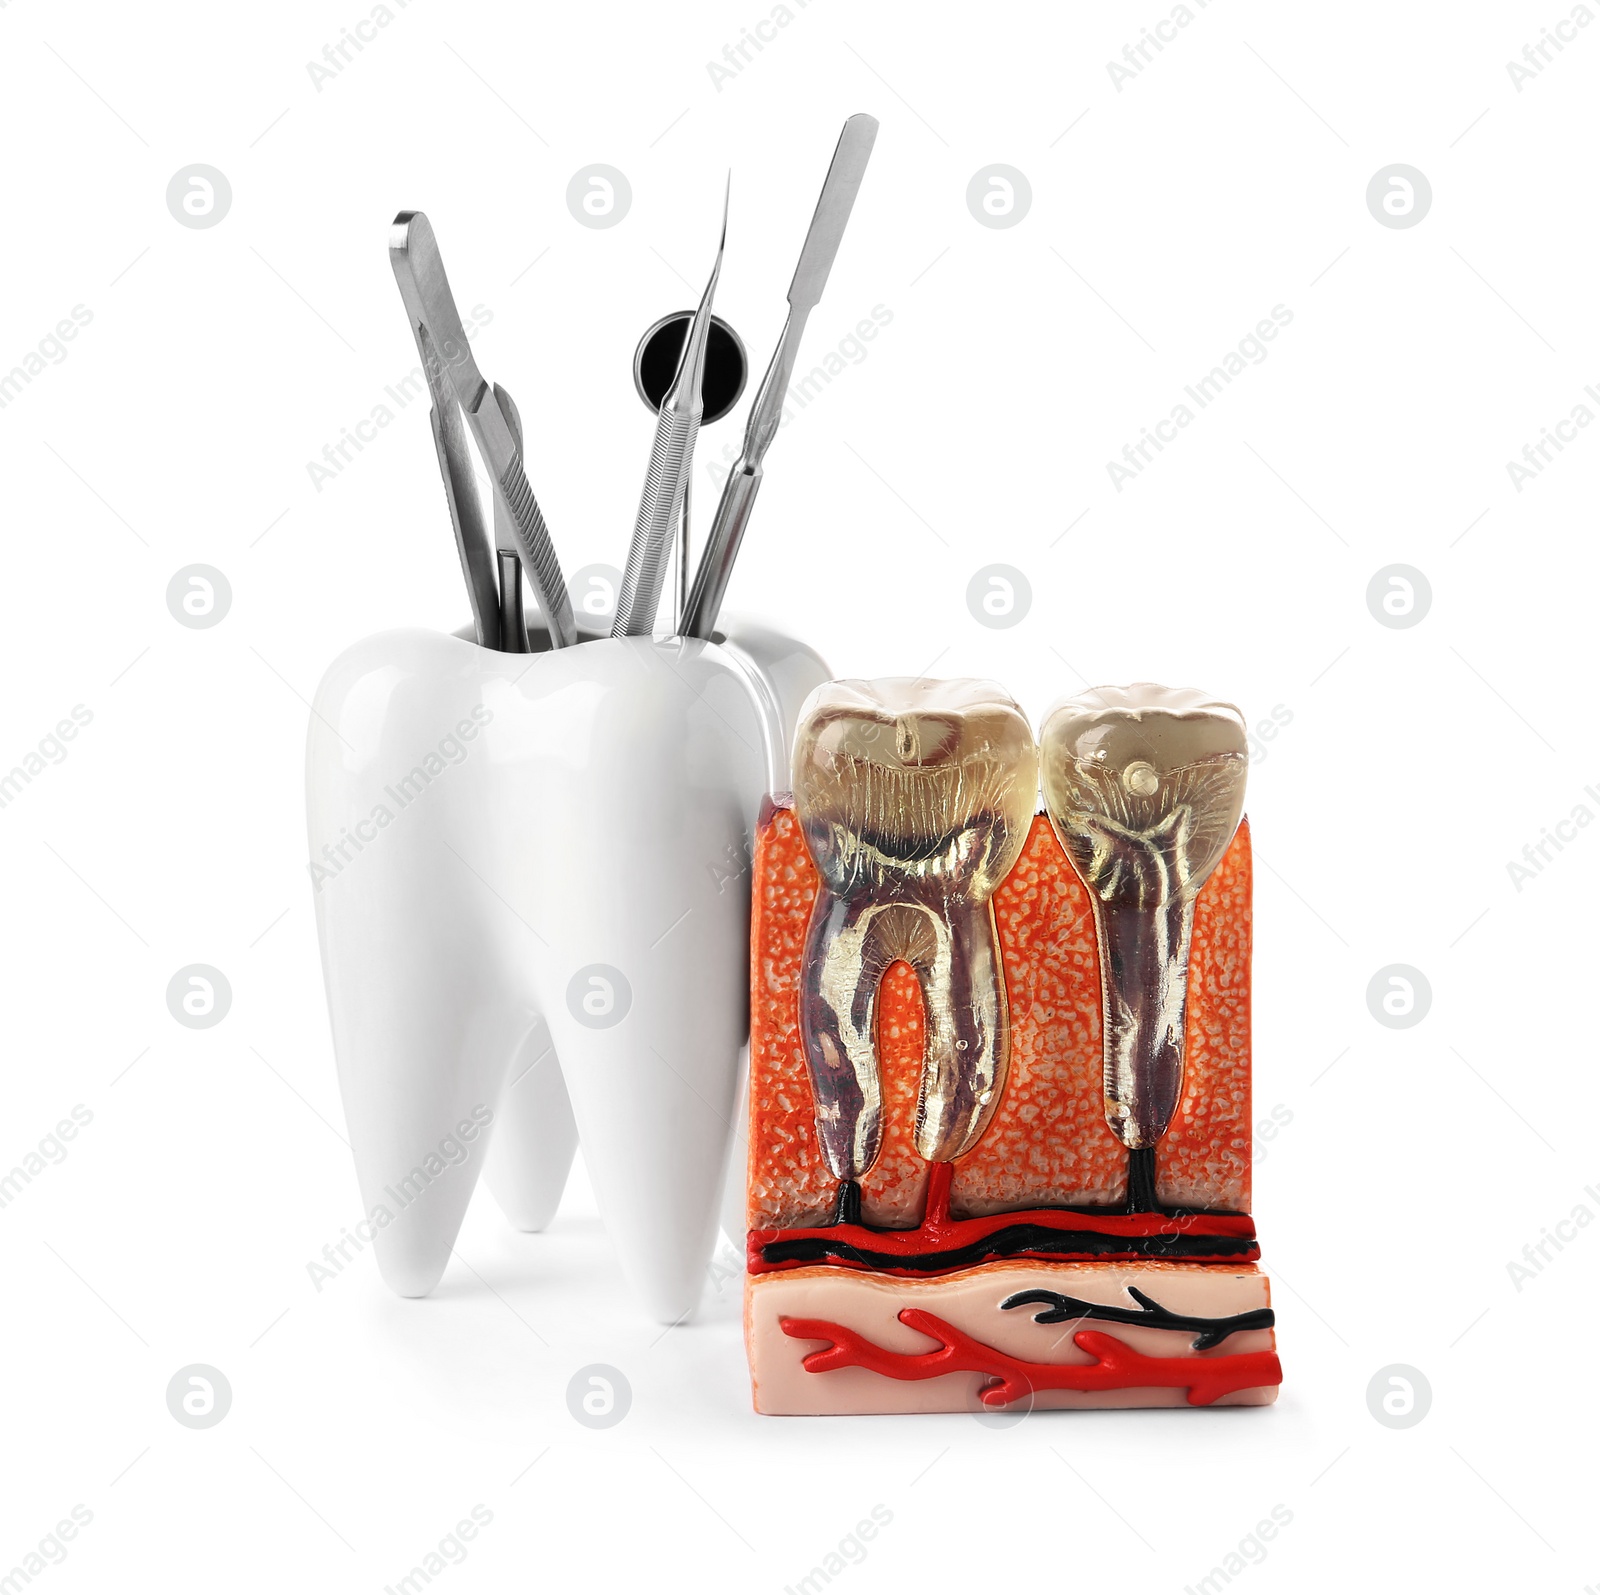 Photo of Educational model of jaw section with teeth and professional tools in holder on white background